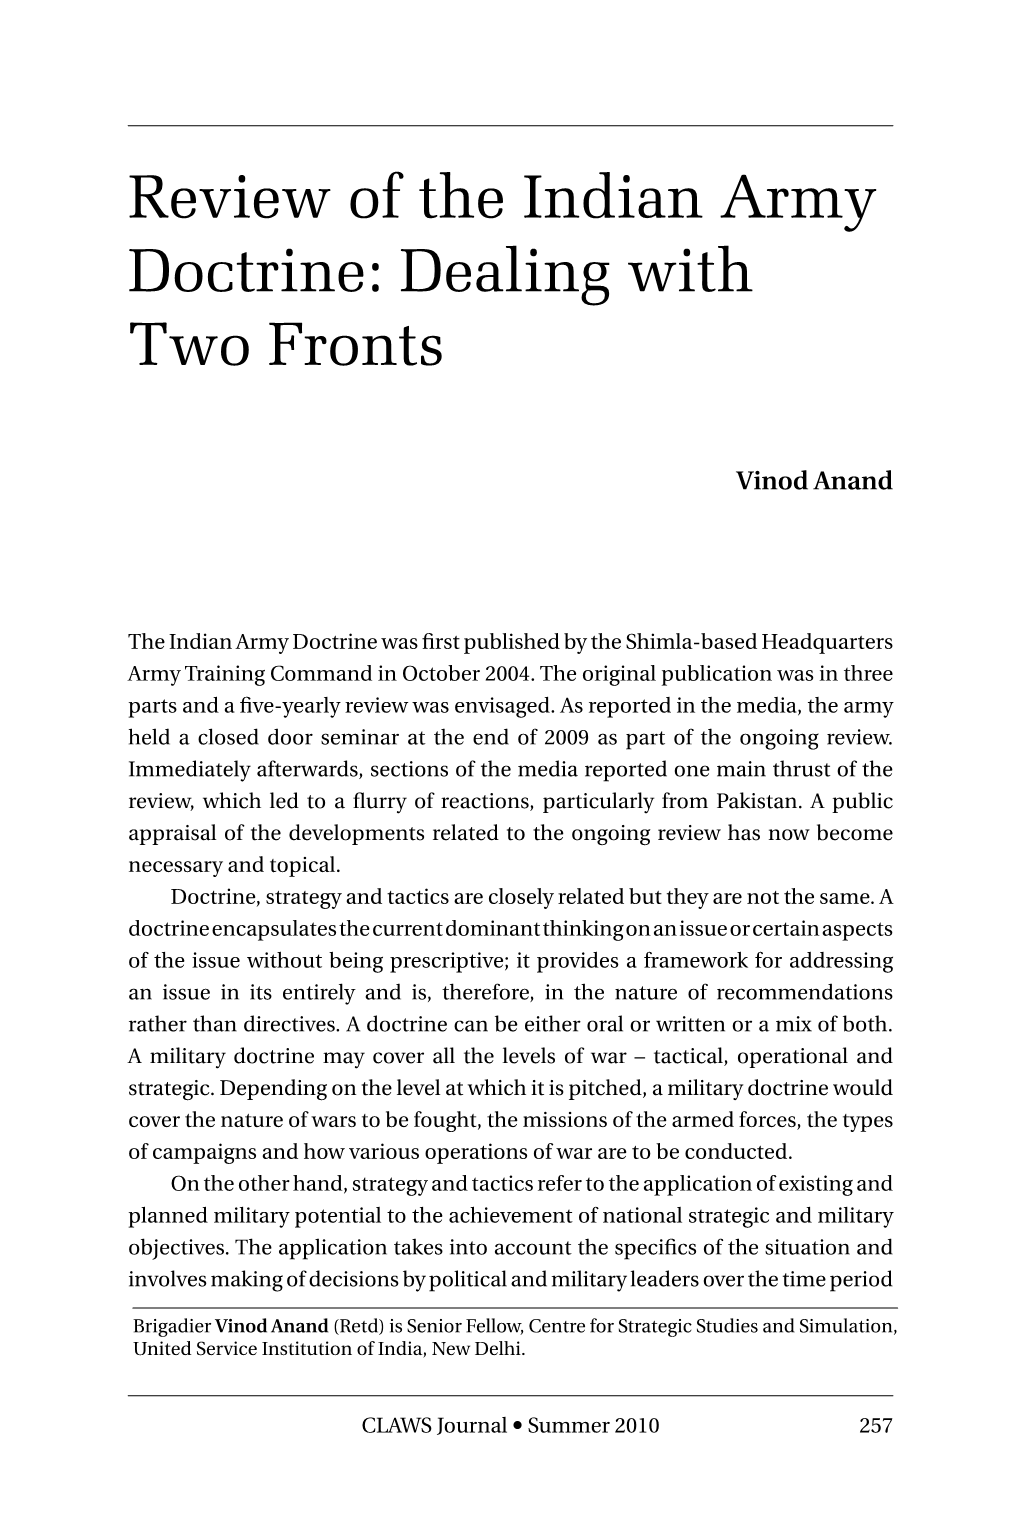 Review of the Indian Army Doctrine: Dealing with Two Fronts